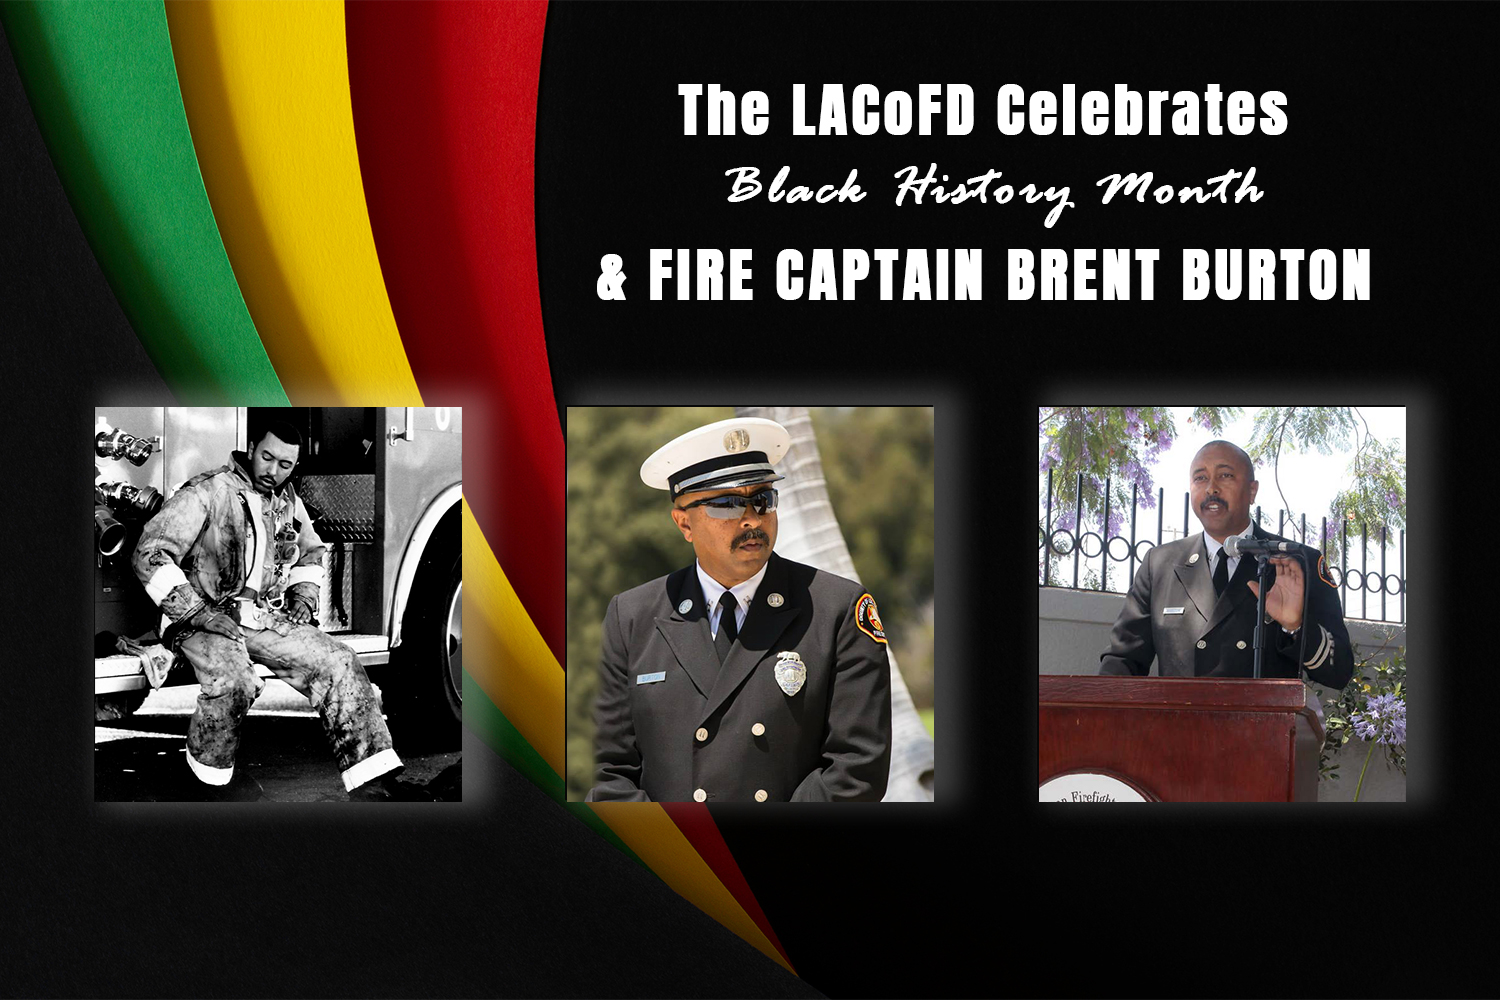 As we conclude Black History Month this year, we shine a spotlight on a team member who has made impactful contributions to the Department’s success through his many accomplishments and achievements: Fire Captain Brent Burton.